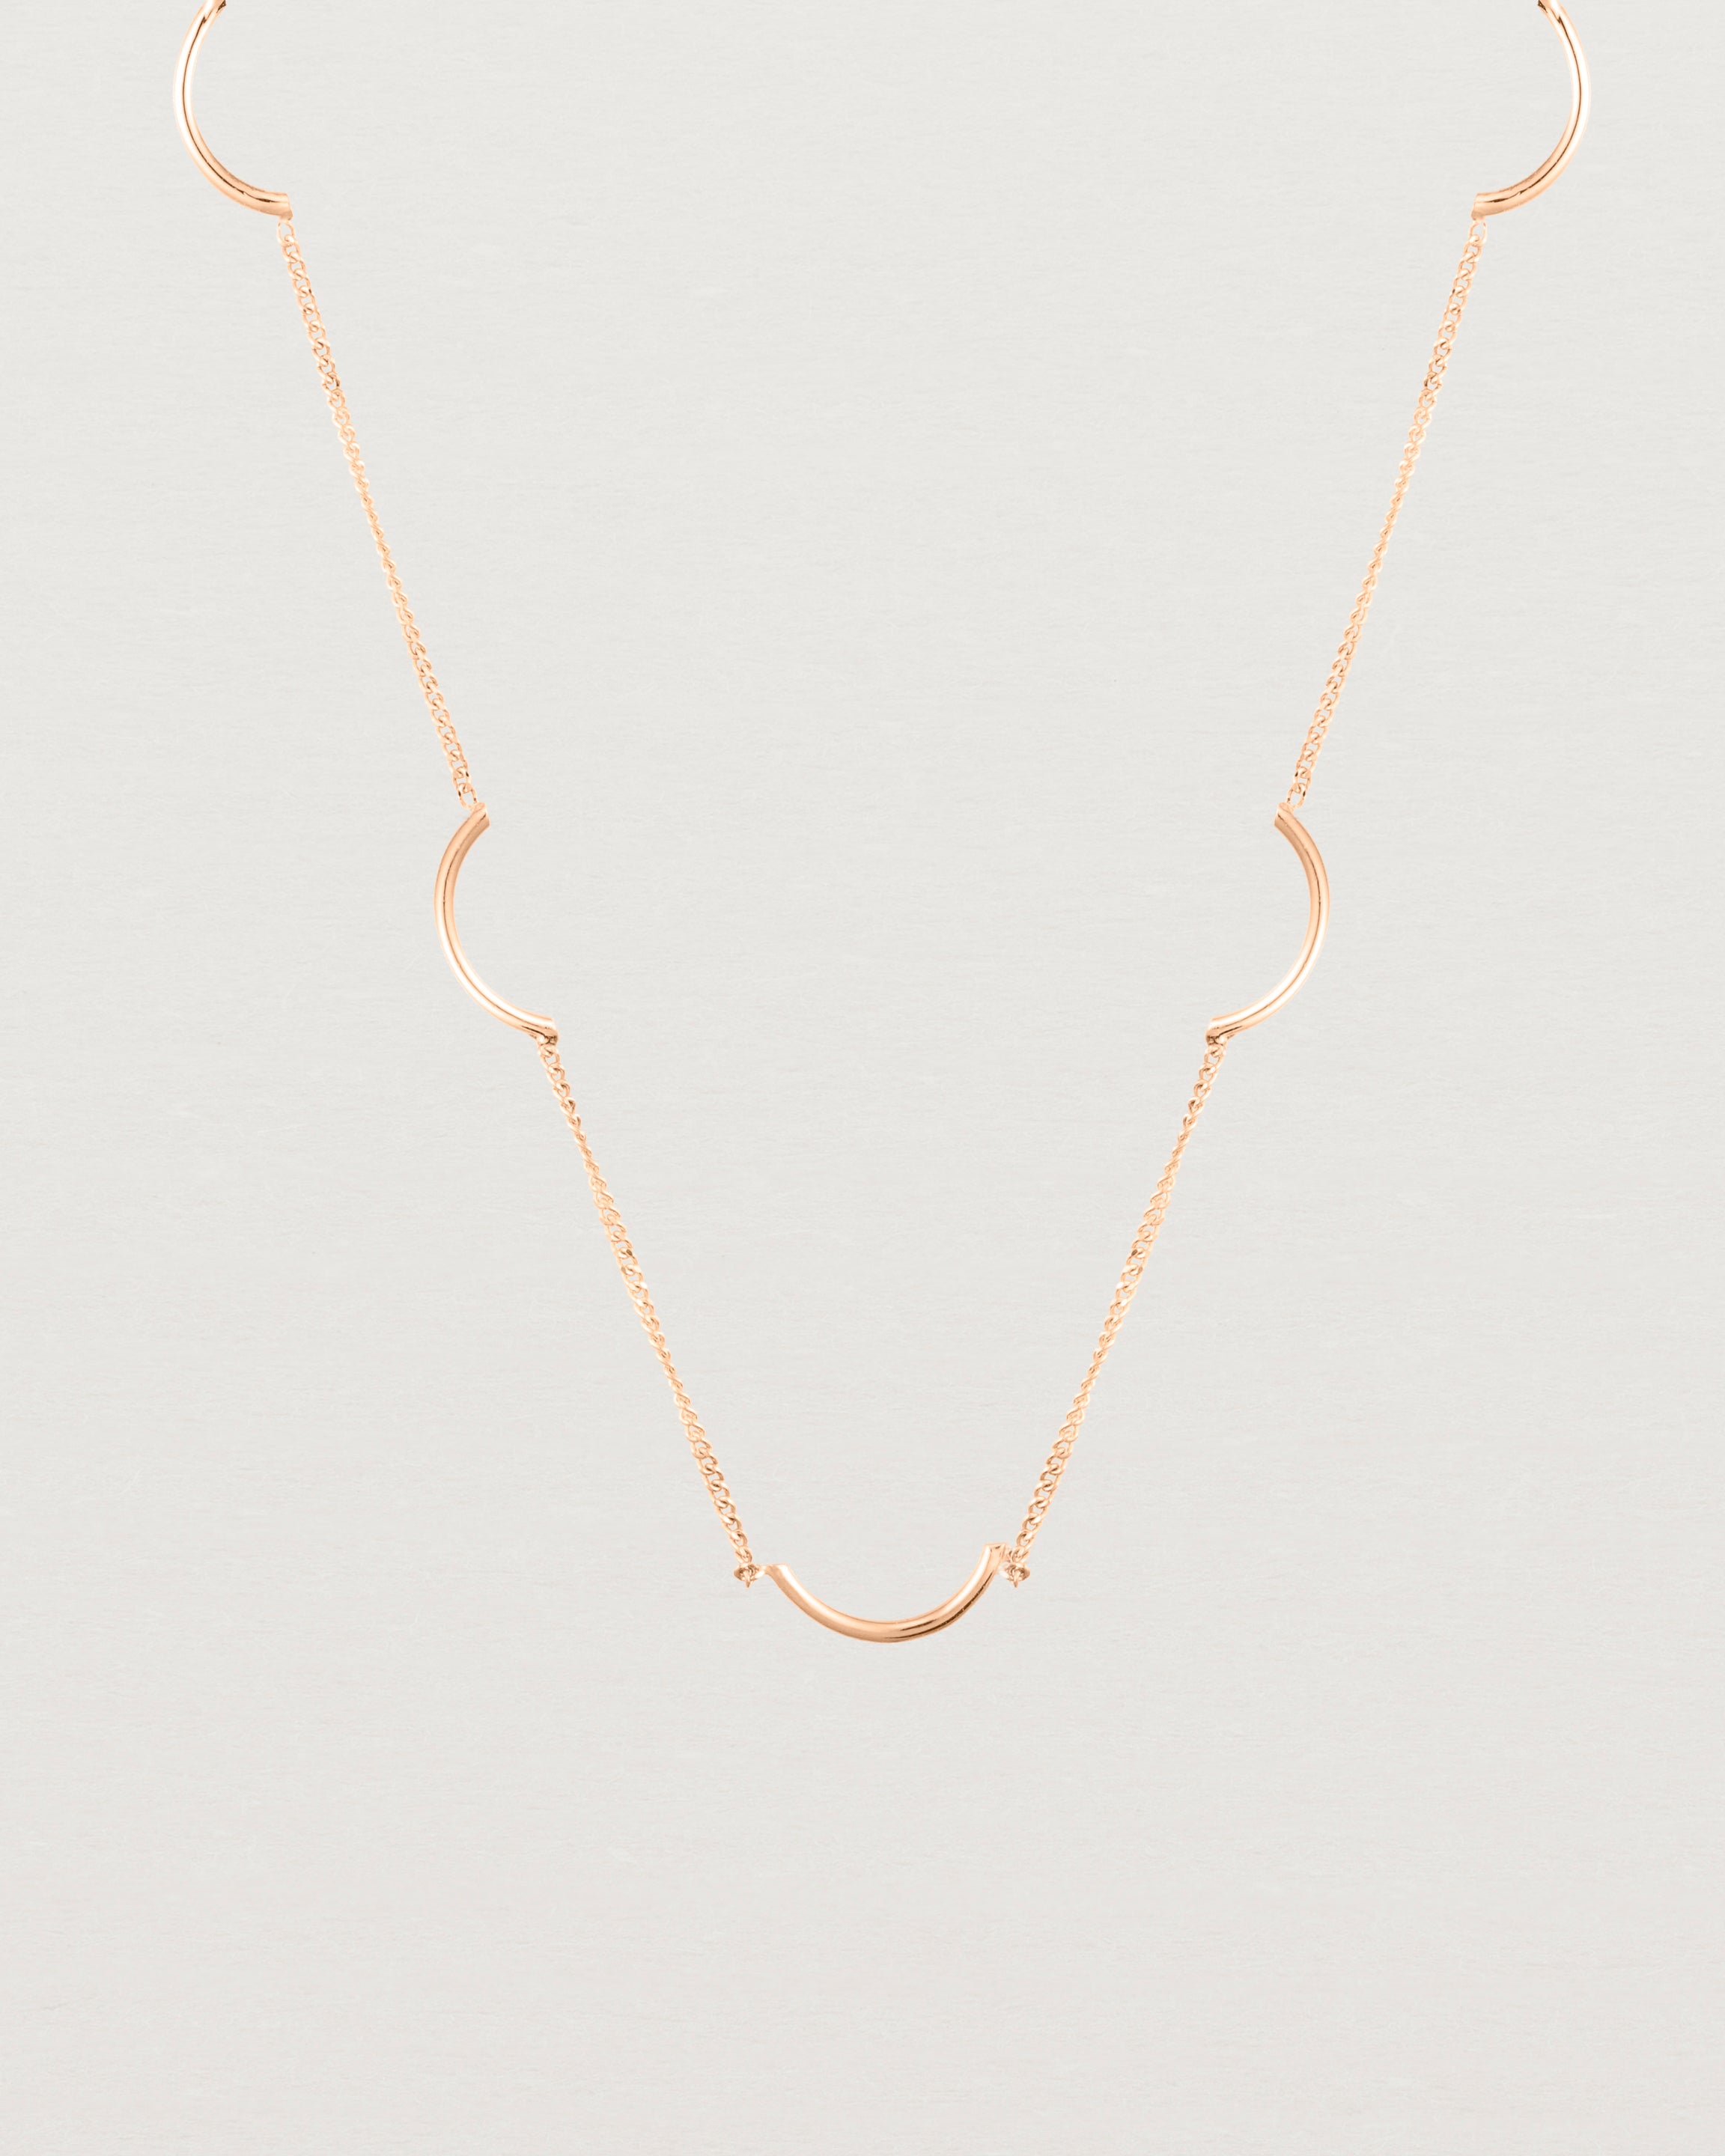 Close up of the Lai Chain Necklace in rose gold.